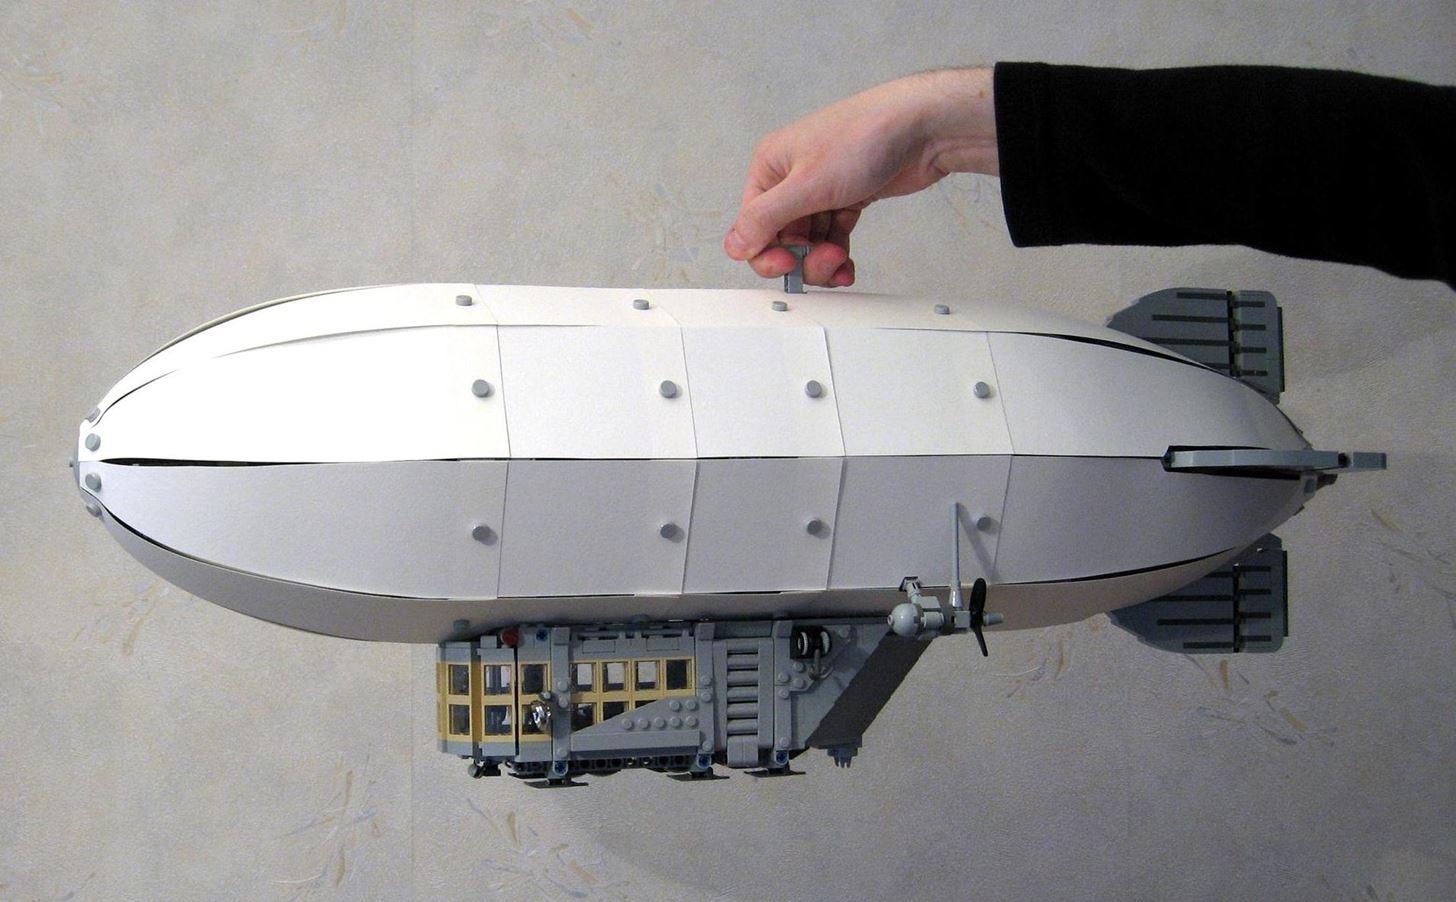 Majestic Airship Needs Votes to Get Produced by LEGO